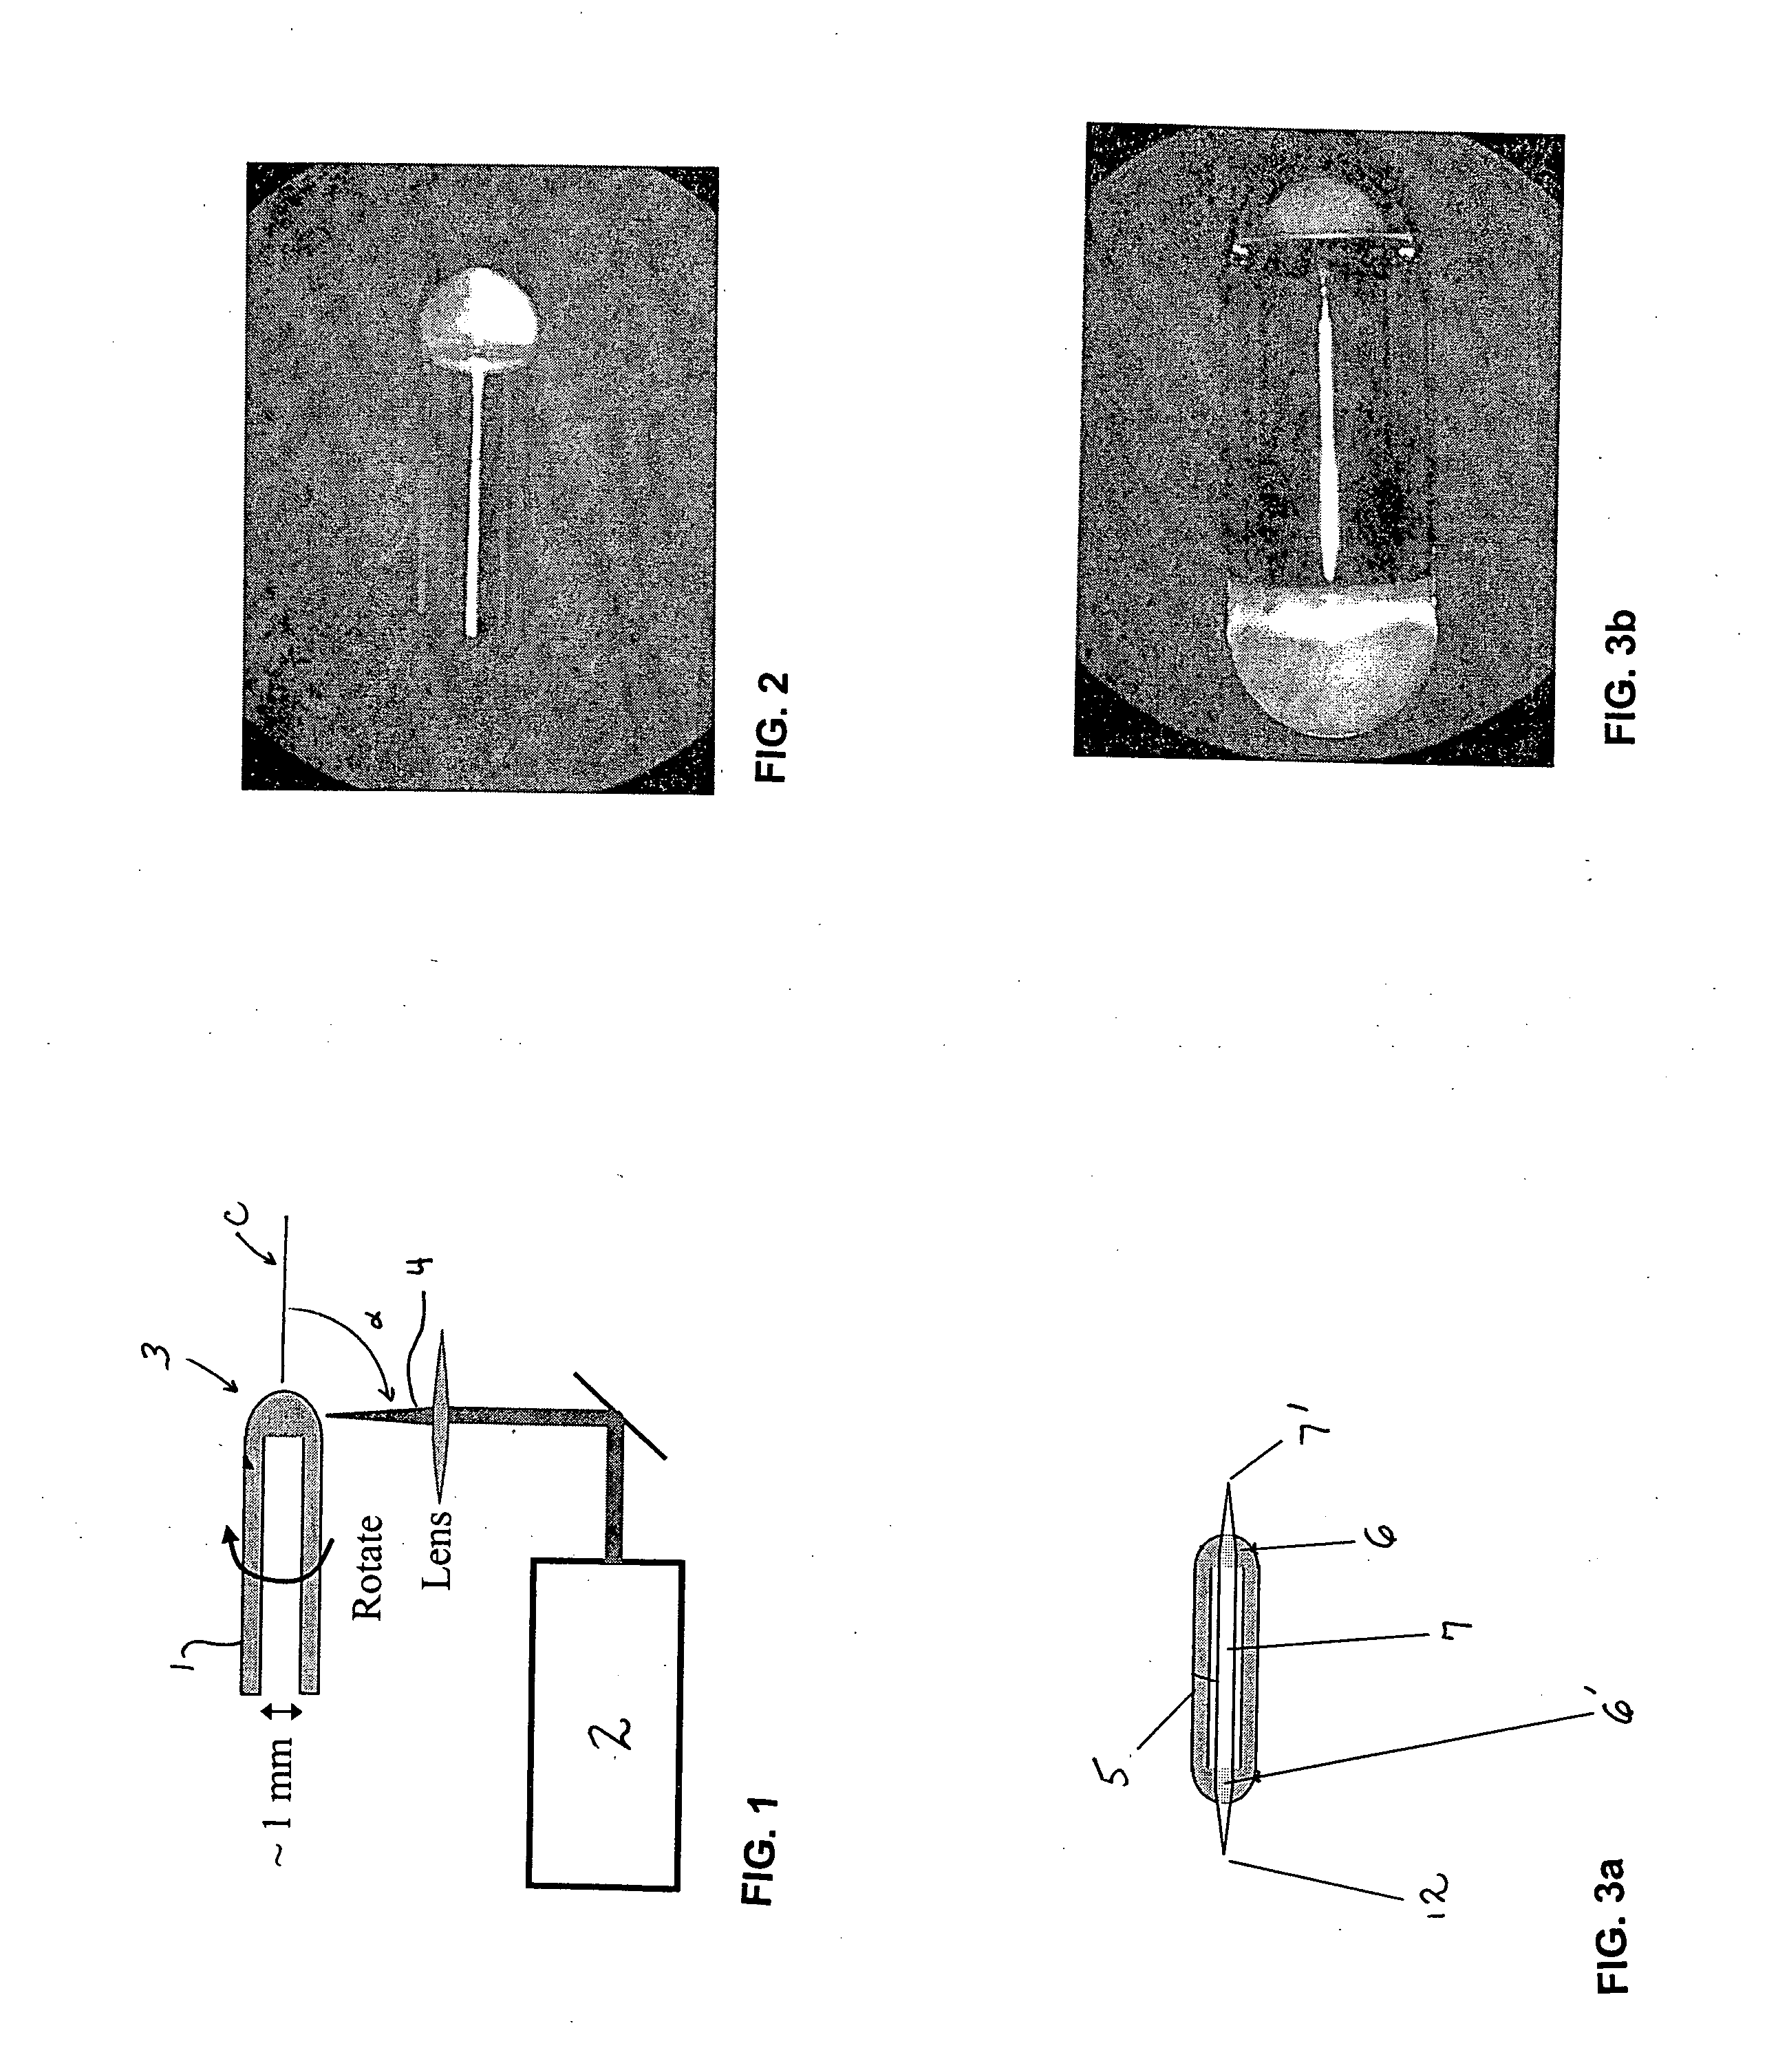 Micromachined alkali-atom vapor cells and method of fabrication